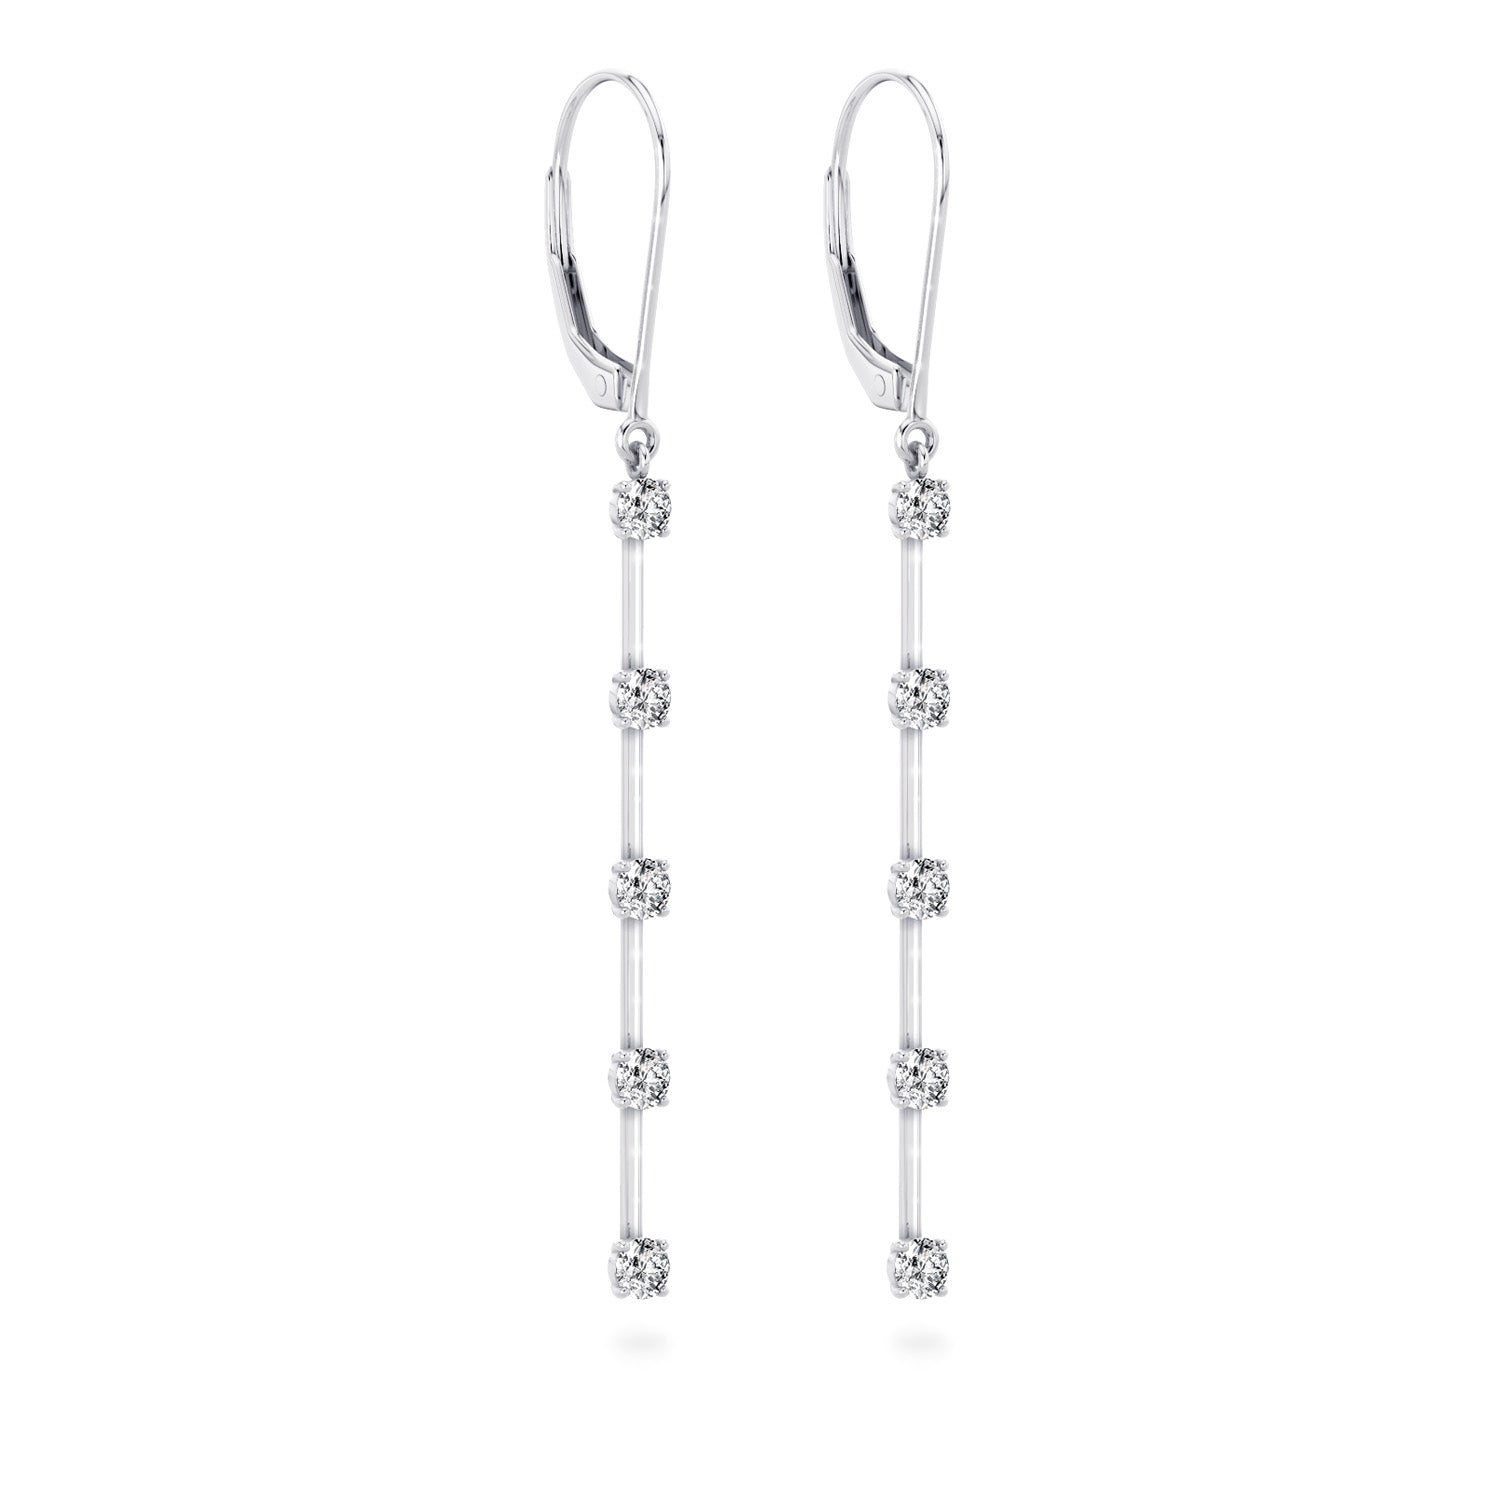 Shimansky - Line Drop Diamond Earrings 1.30ct crafted in 14K White Gold